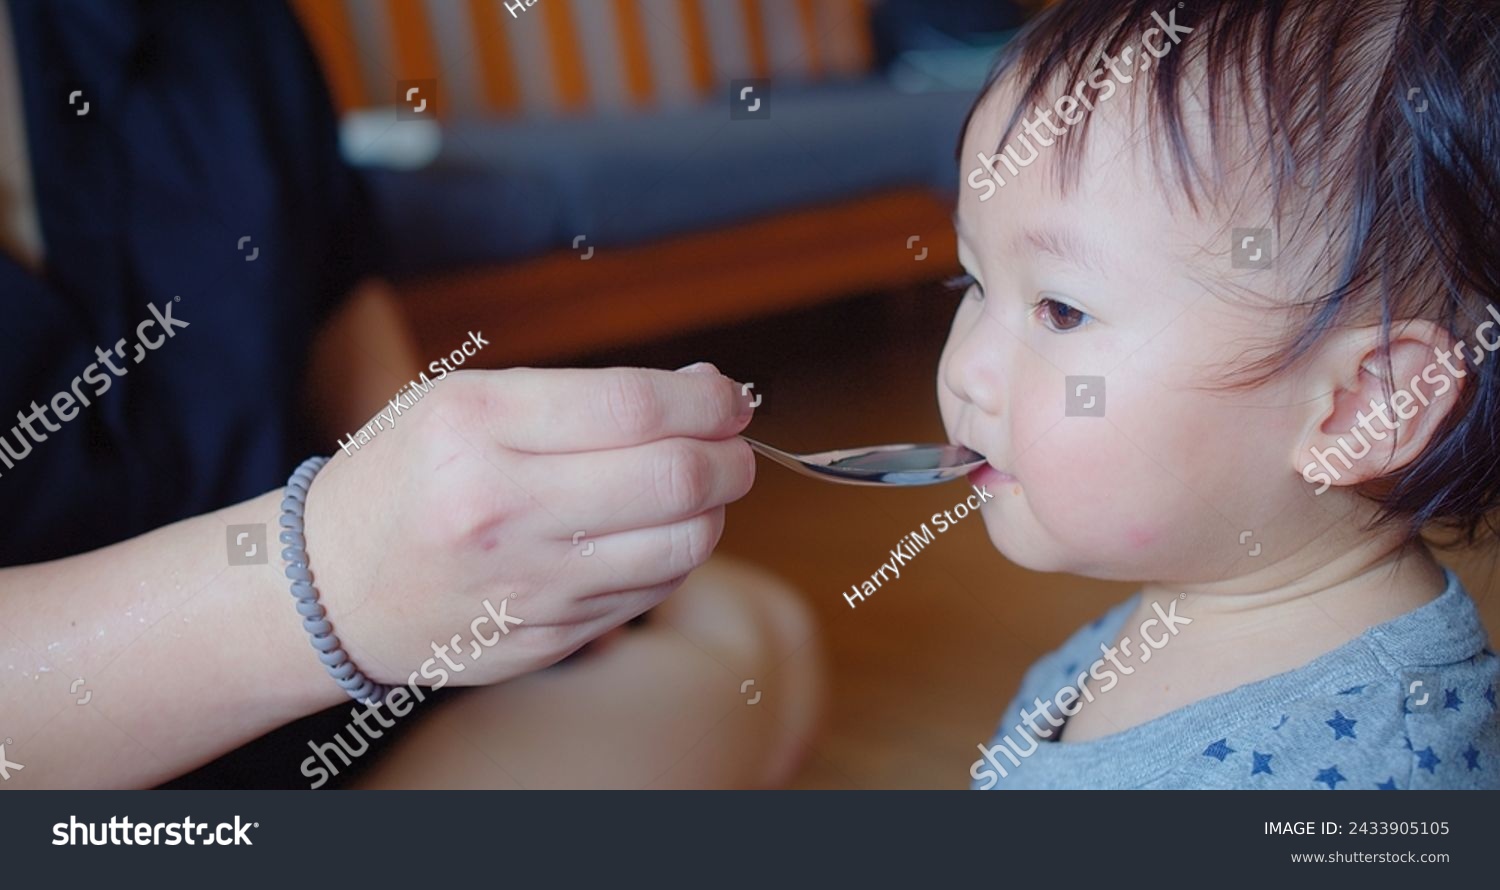 An eager toddler opens wide for a spoonful of food during a messy yet joyful feeding time at home #2433905105